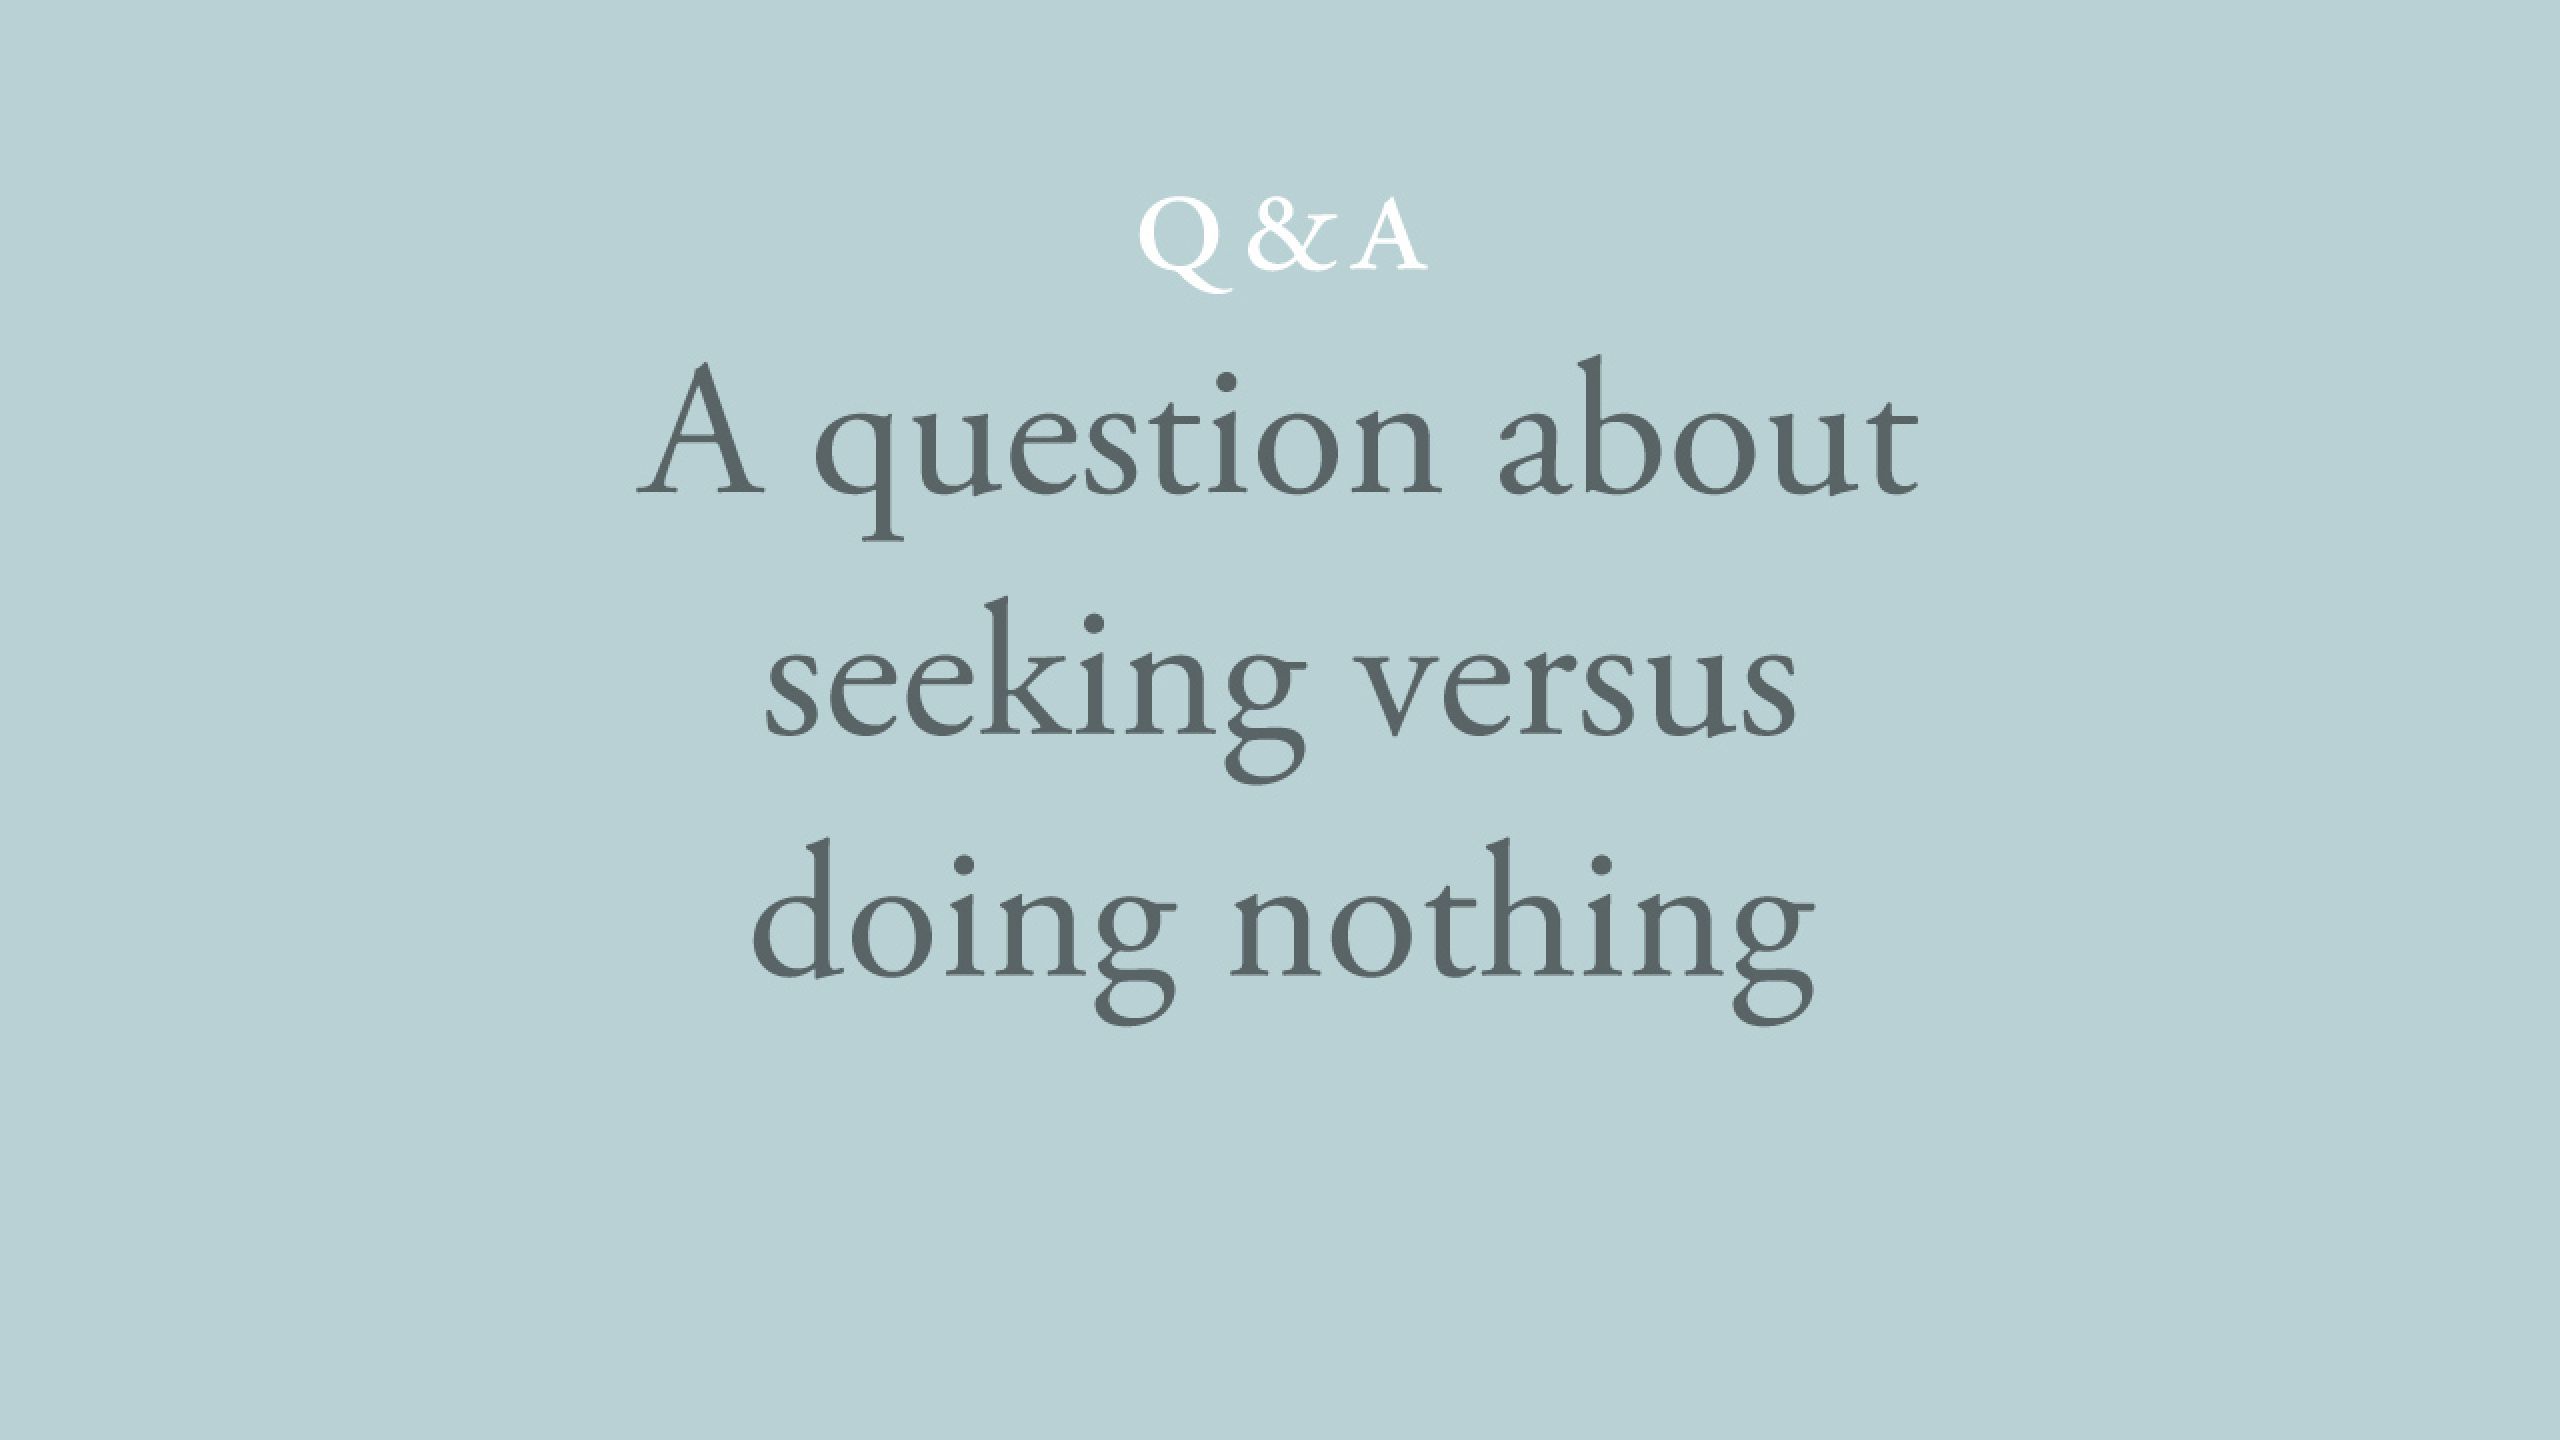 Should we be seeking or doing nothing? 